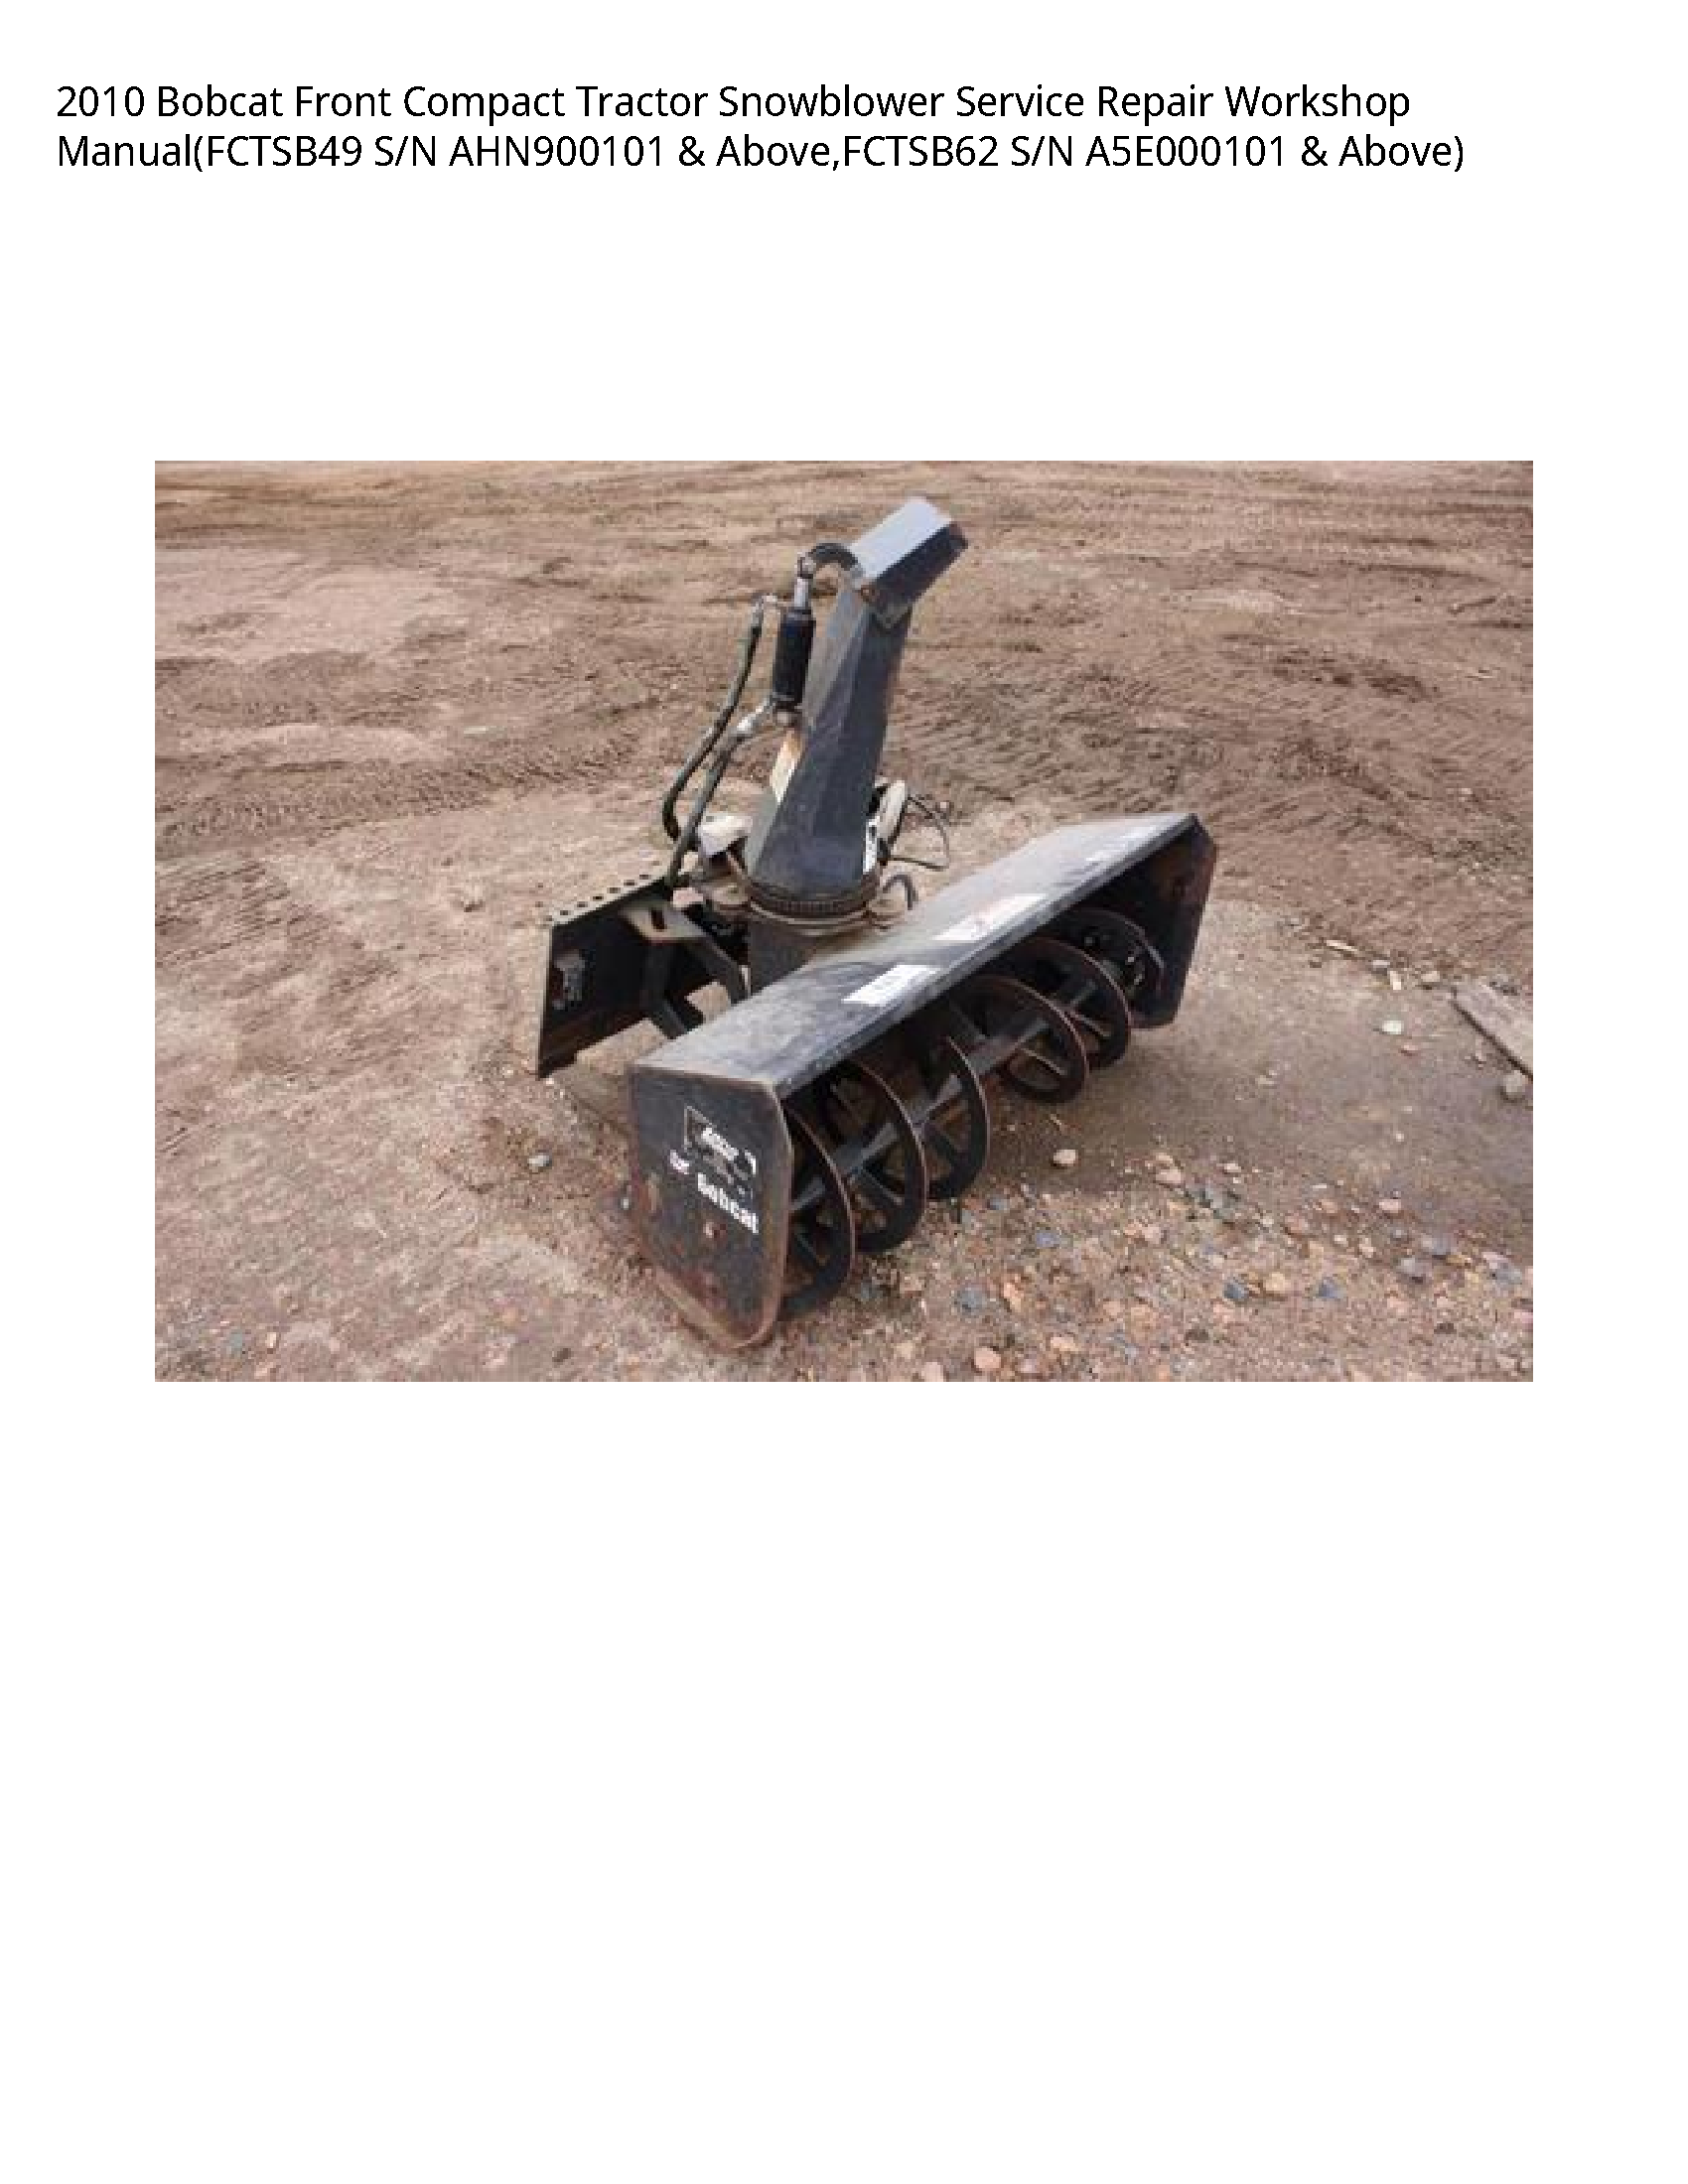 Bobcat Front Compact Tractor Snowblower manual